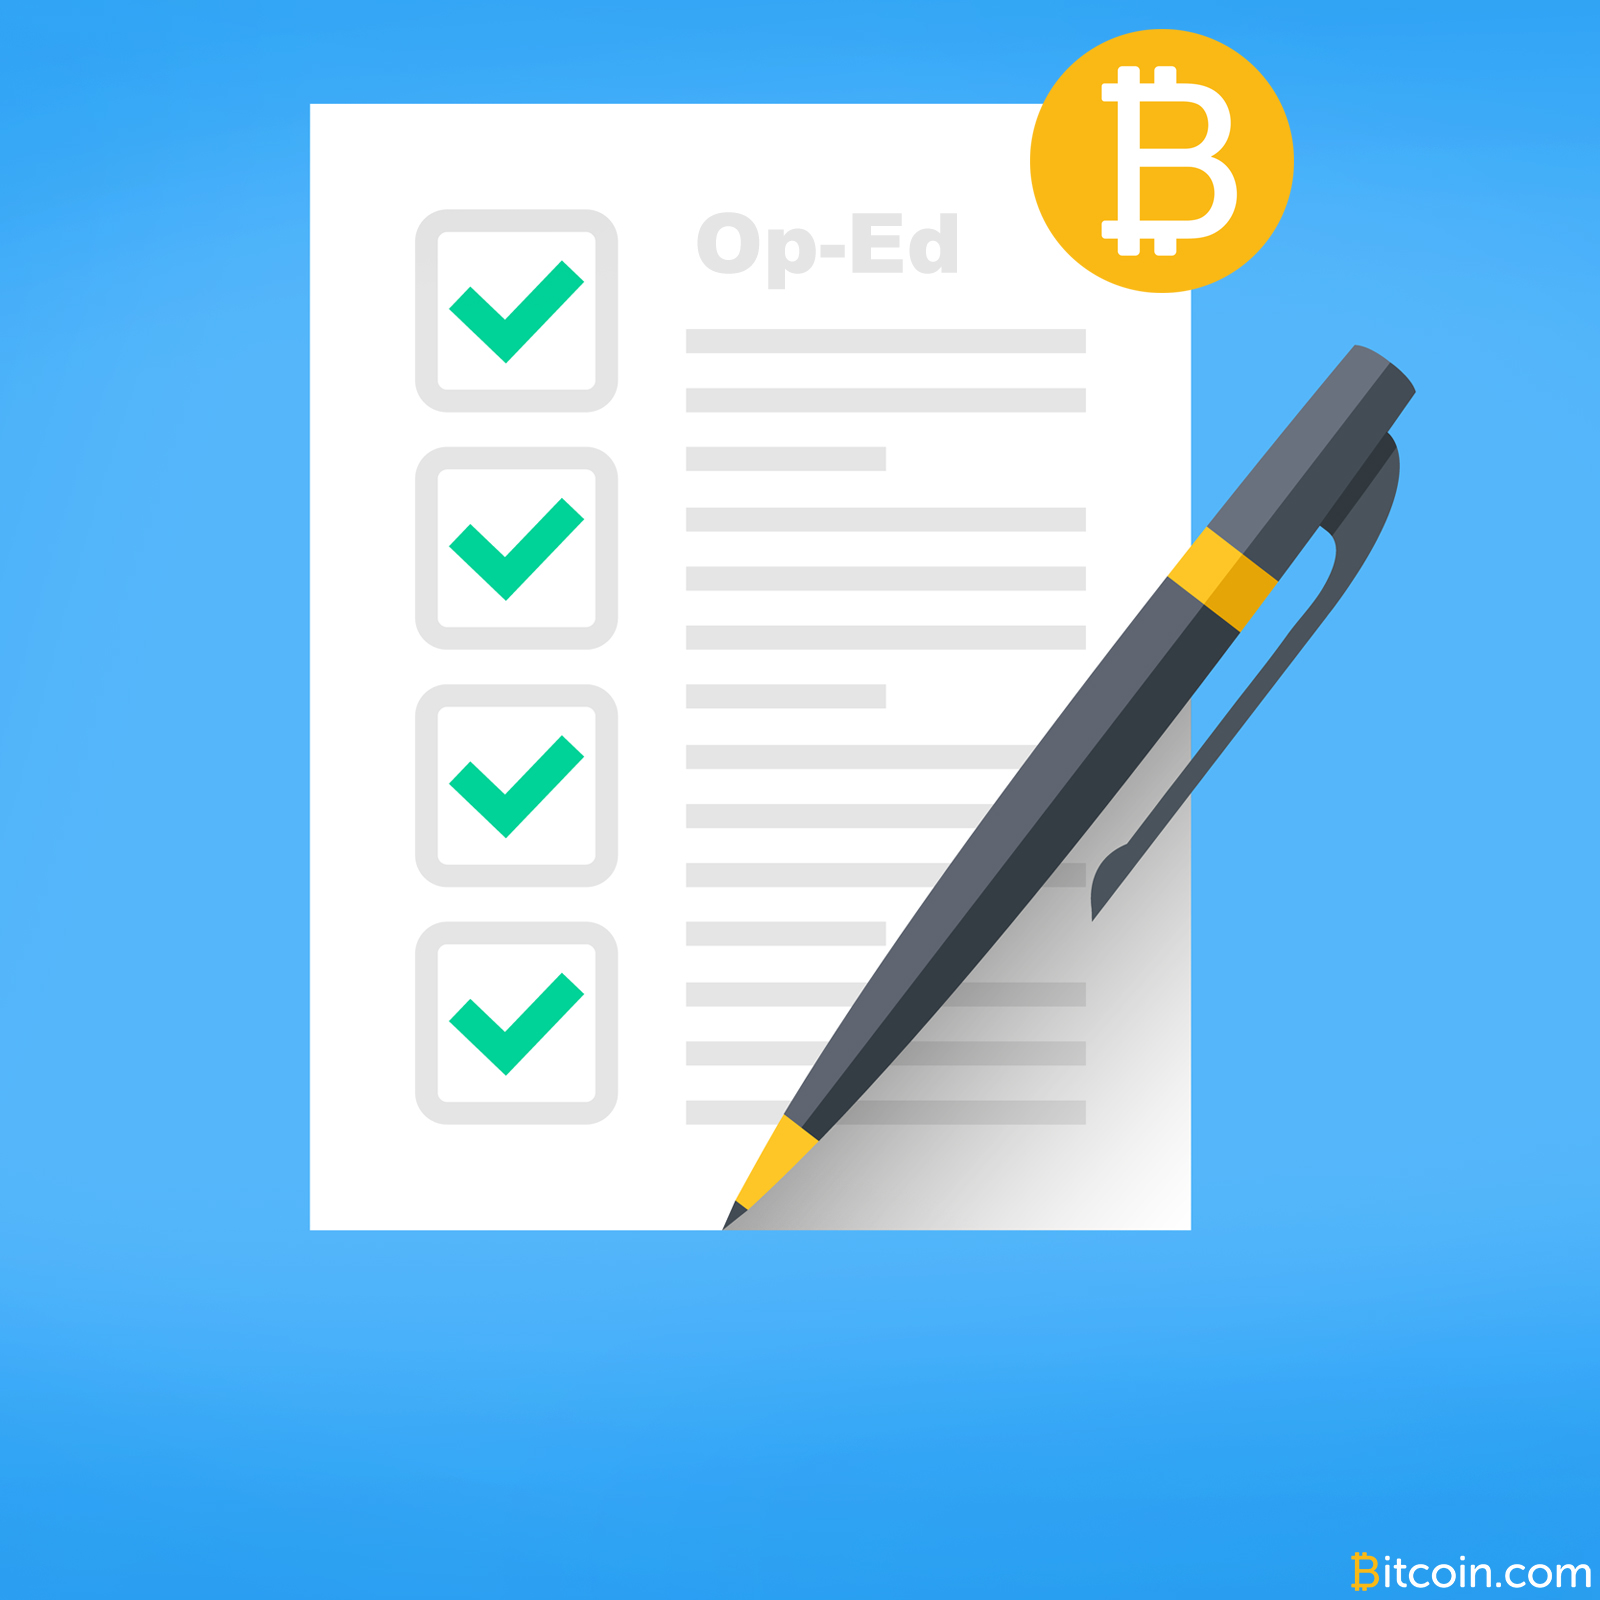 Do You Have What it Takes to Write Op-Ed Articles for Bitcoin.com?